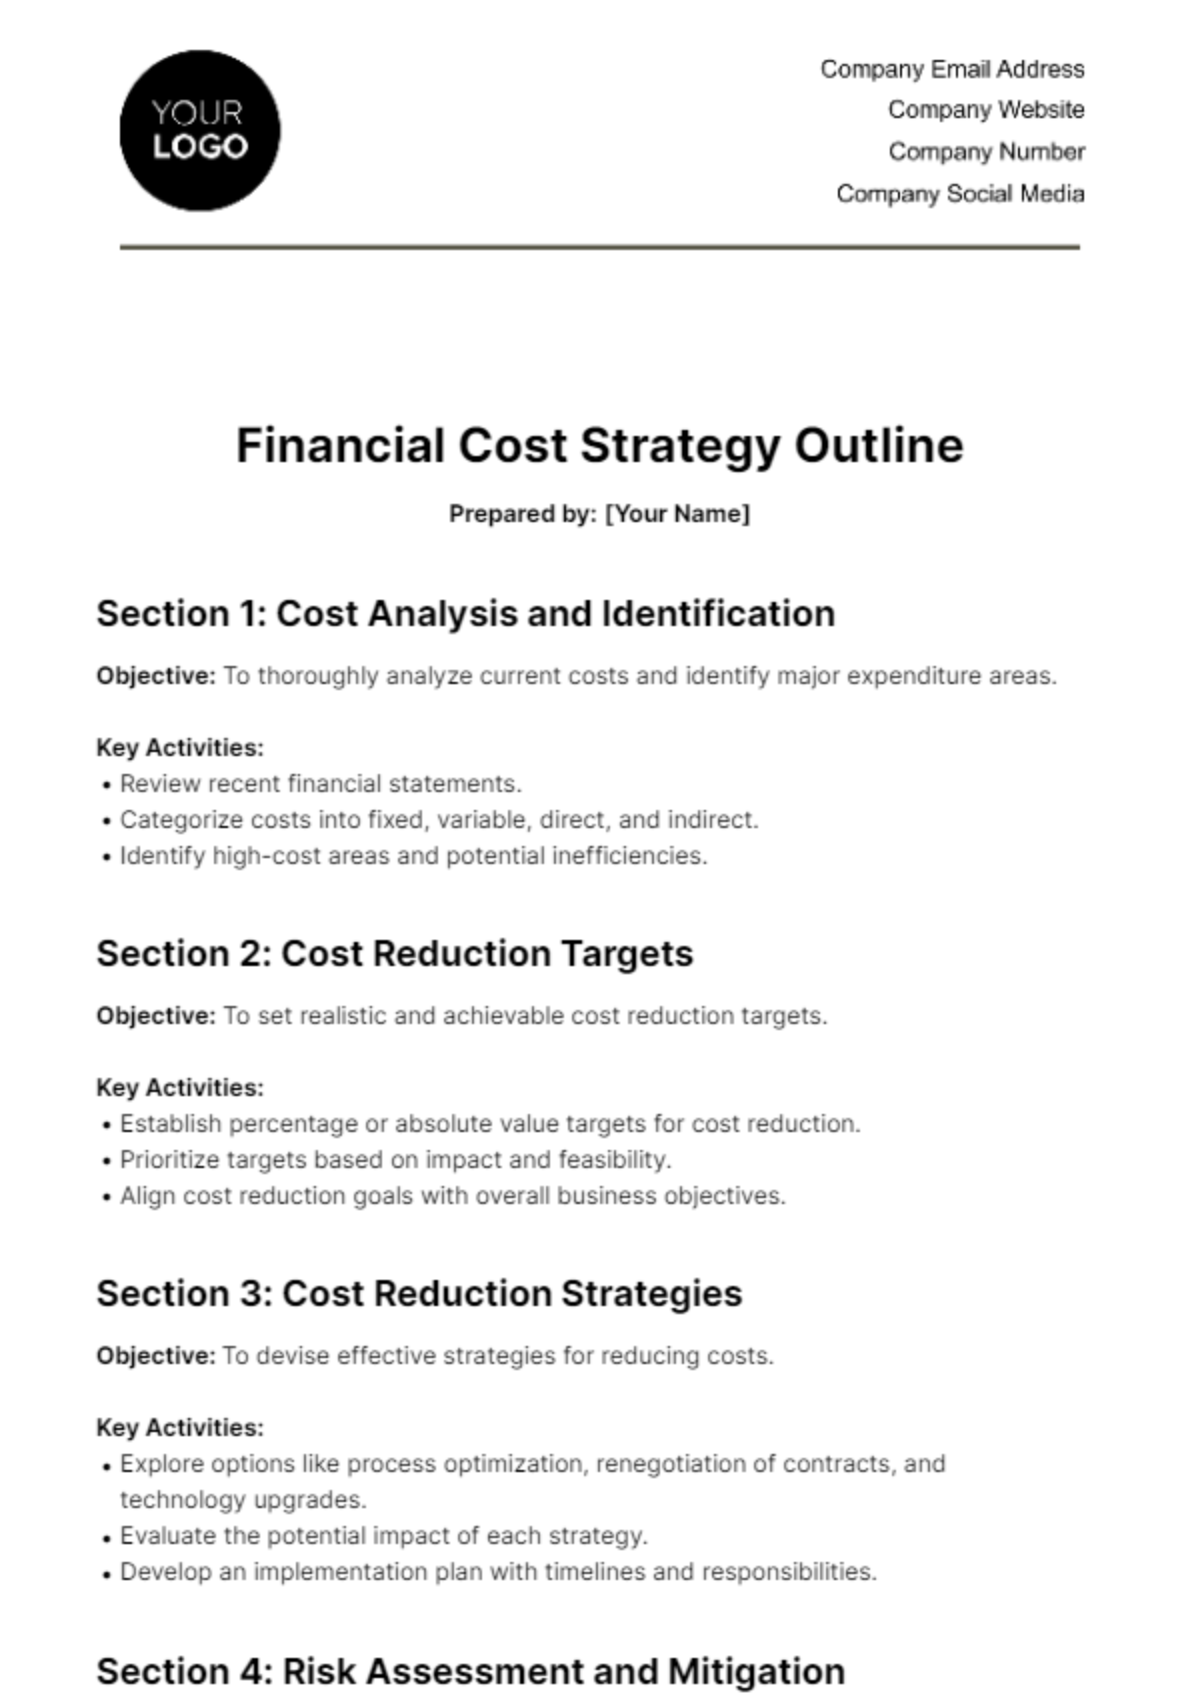 Financial Cost Strategy Outline Template